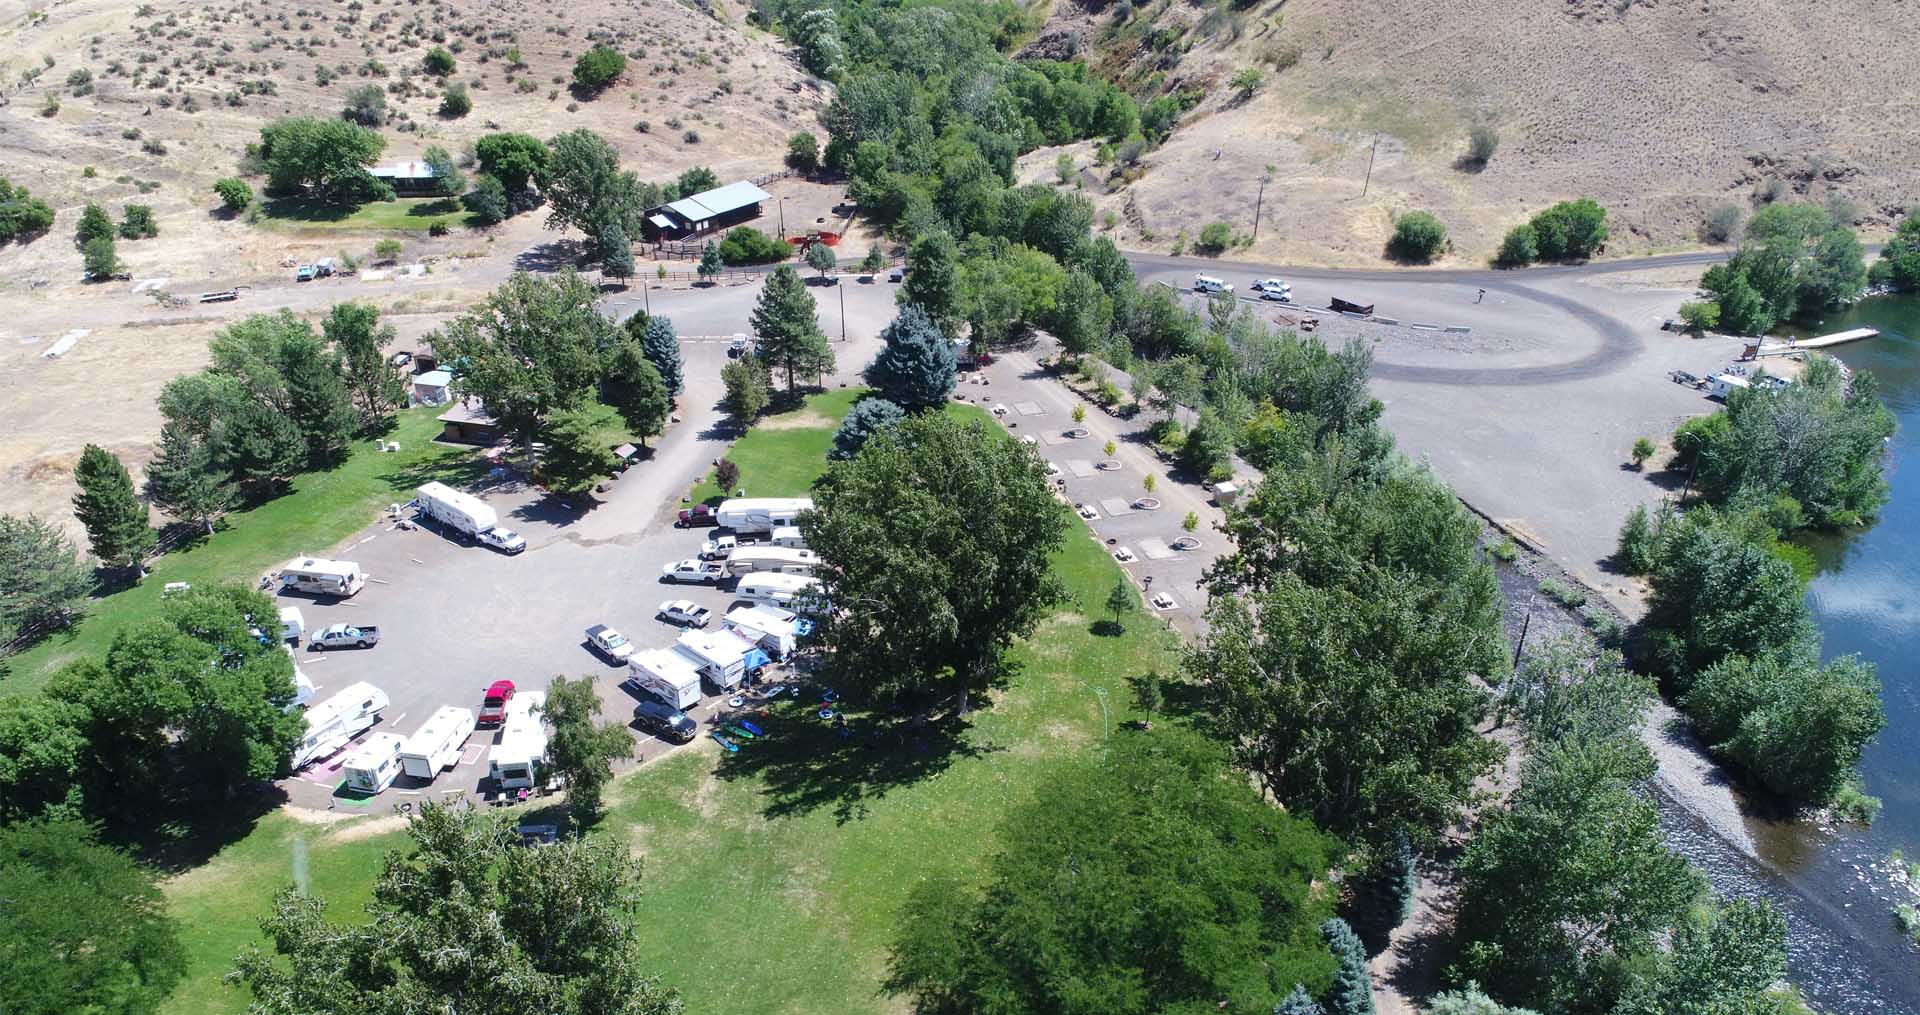 Image of McCormick Park campground in Idaho.